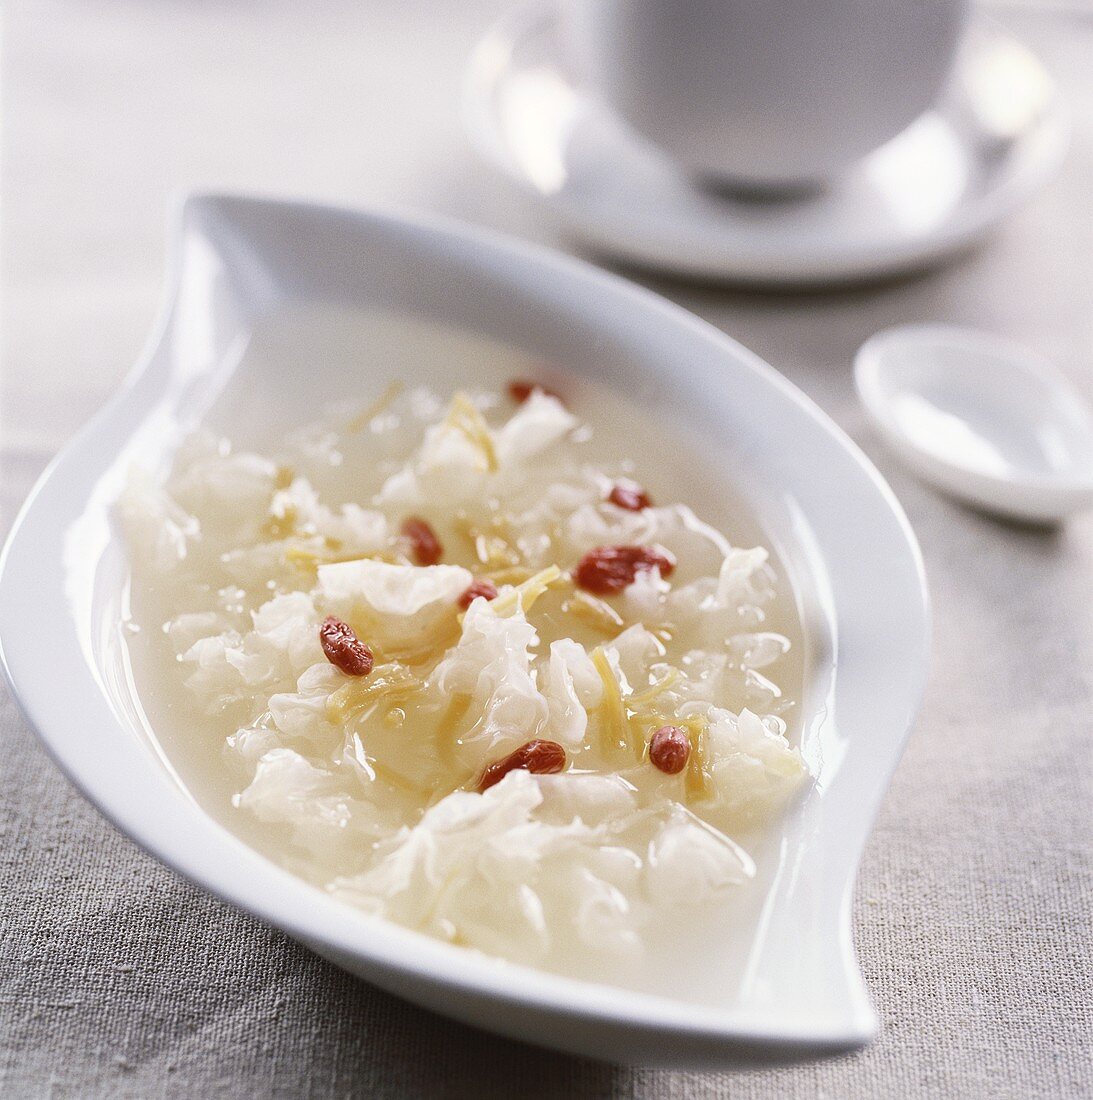 Tremella soup with wolfsberries and shellfish